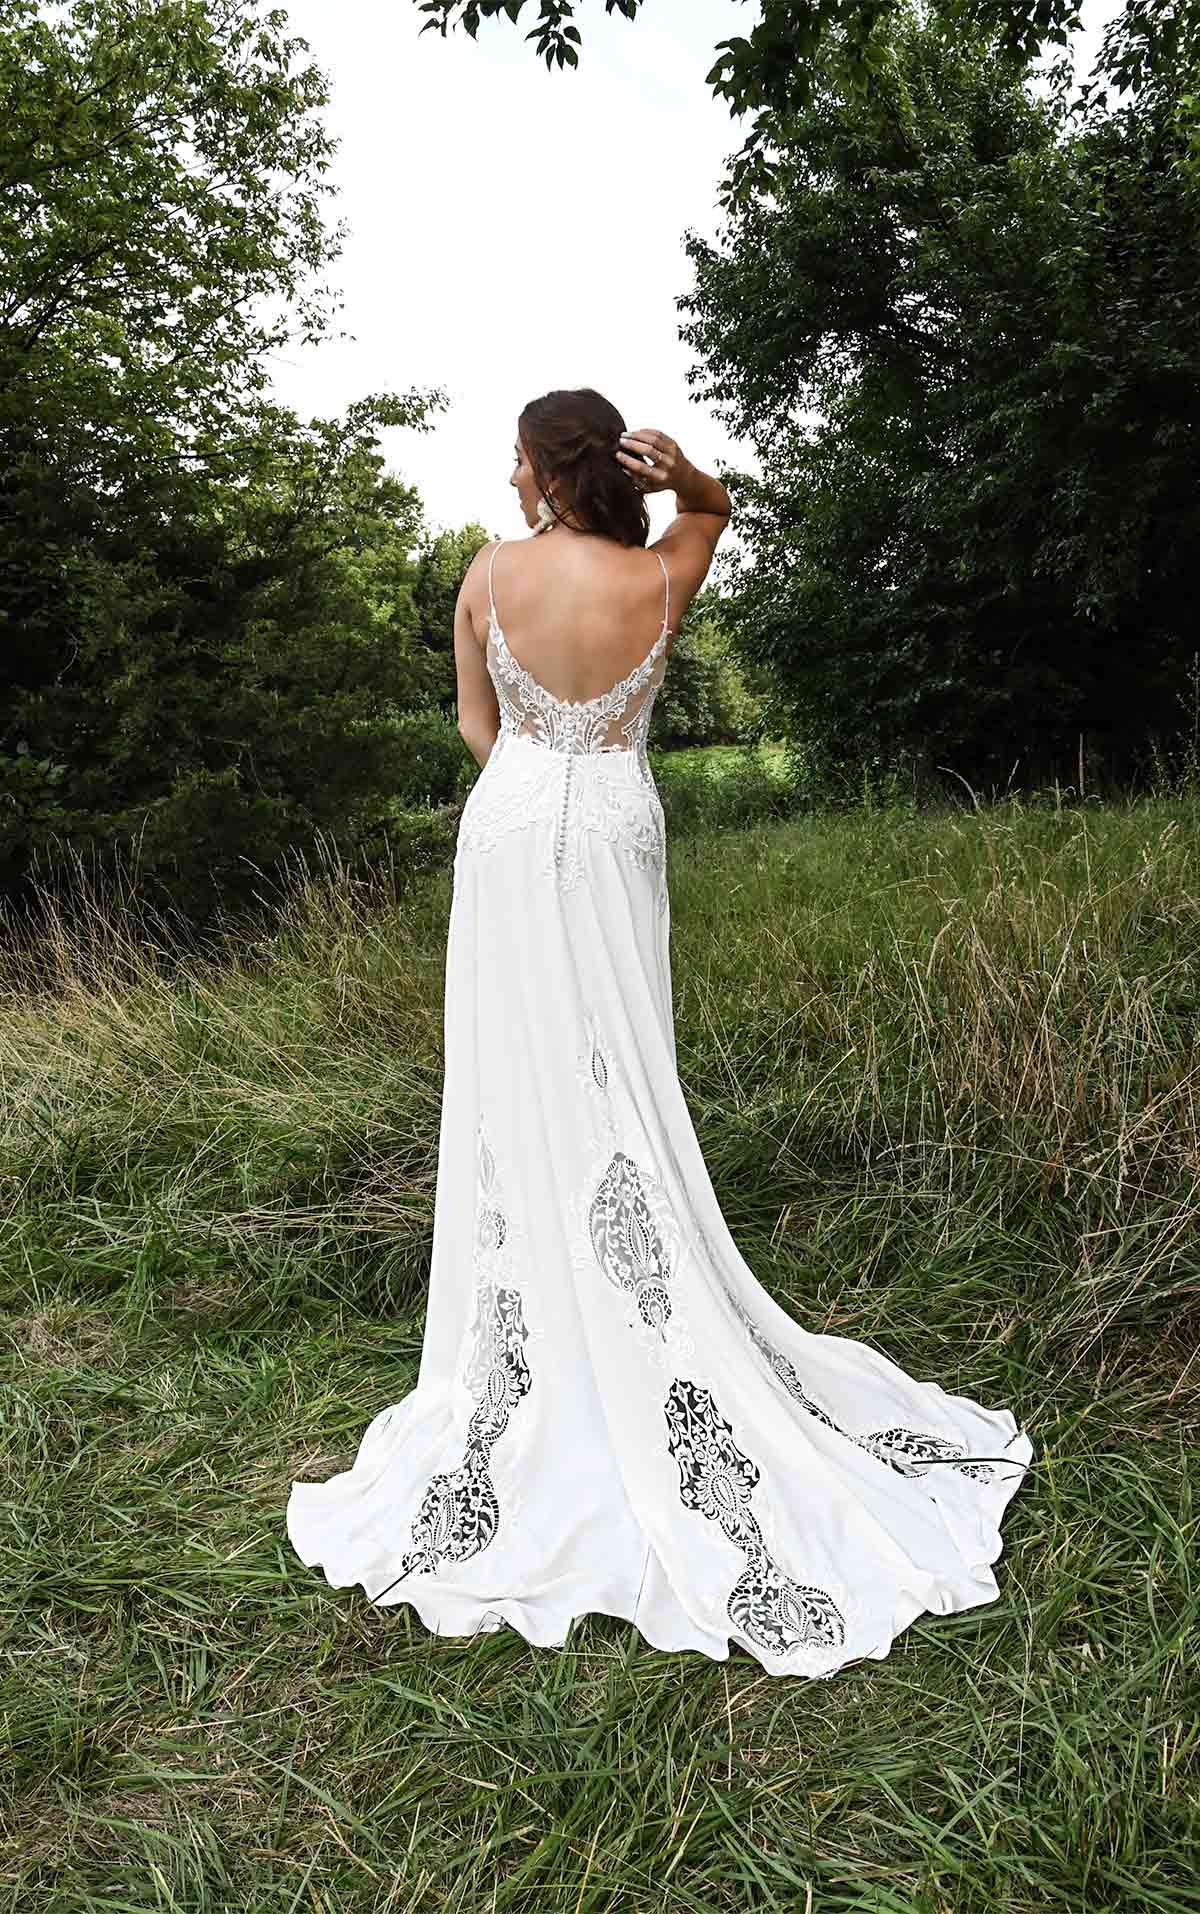 DELTA Embroidered Boho Wedding Dress with Textured Lace and Plunging Sweetheart Neckline by All Who Wander